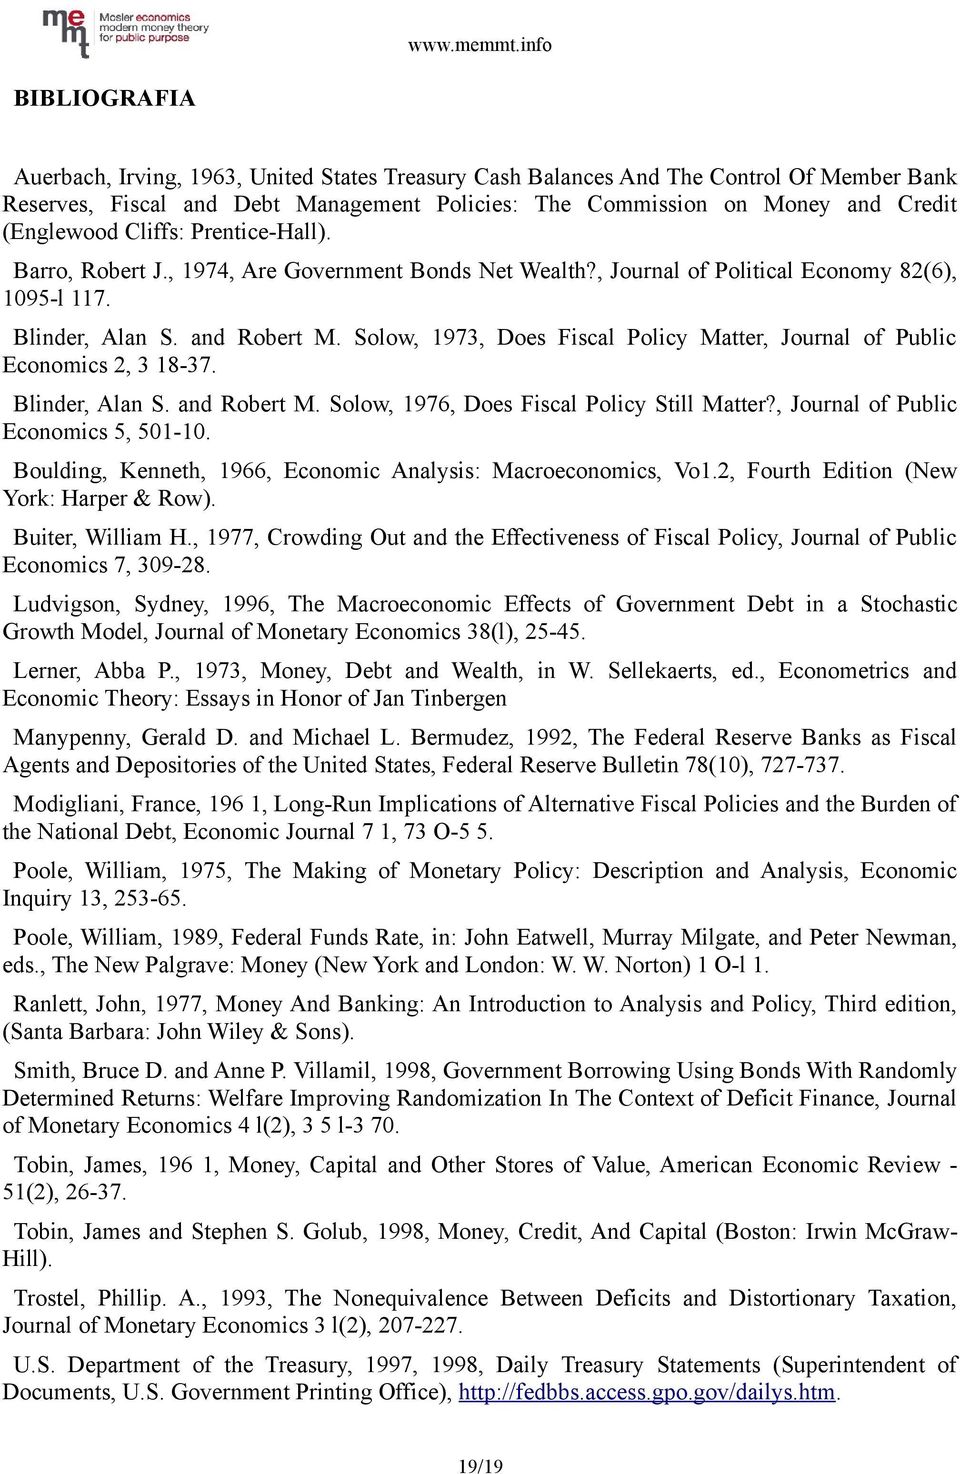 Solow, 1973, Does Fiscal Policy Matter, Journal of Public Economics 2, 3 18-37. Blinder, Alan S. and Robert M. Solow, 1976, Does Fiscal Policy Still Matter?, Journal of Public Economics 5, 501-10.